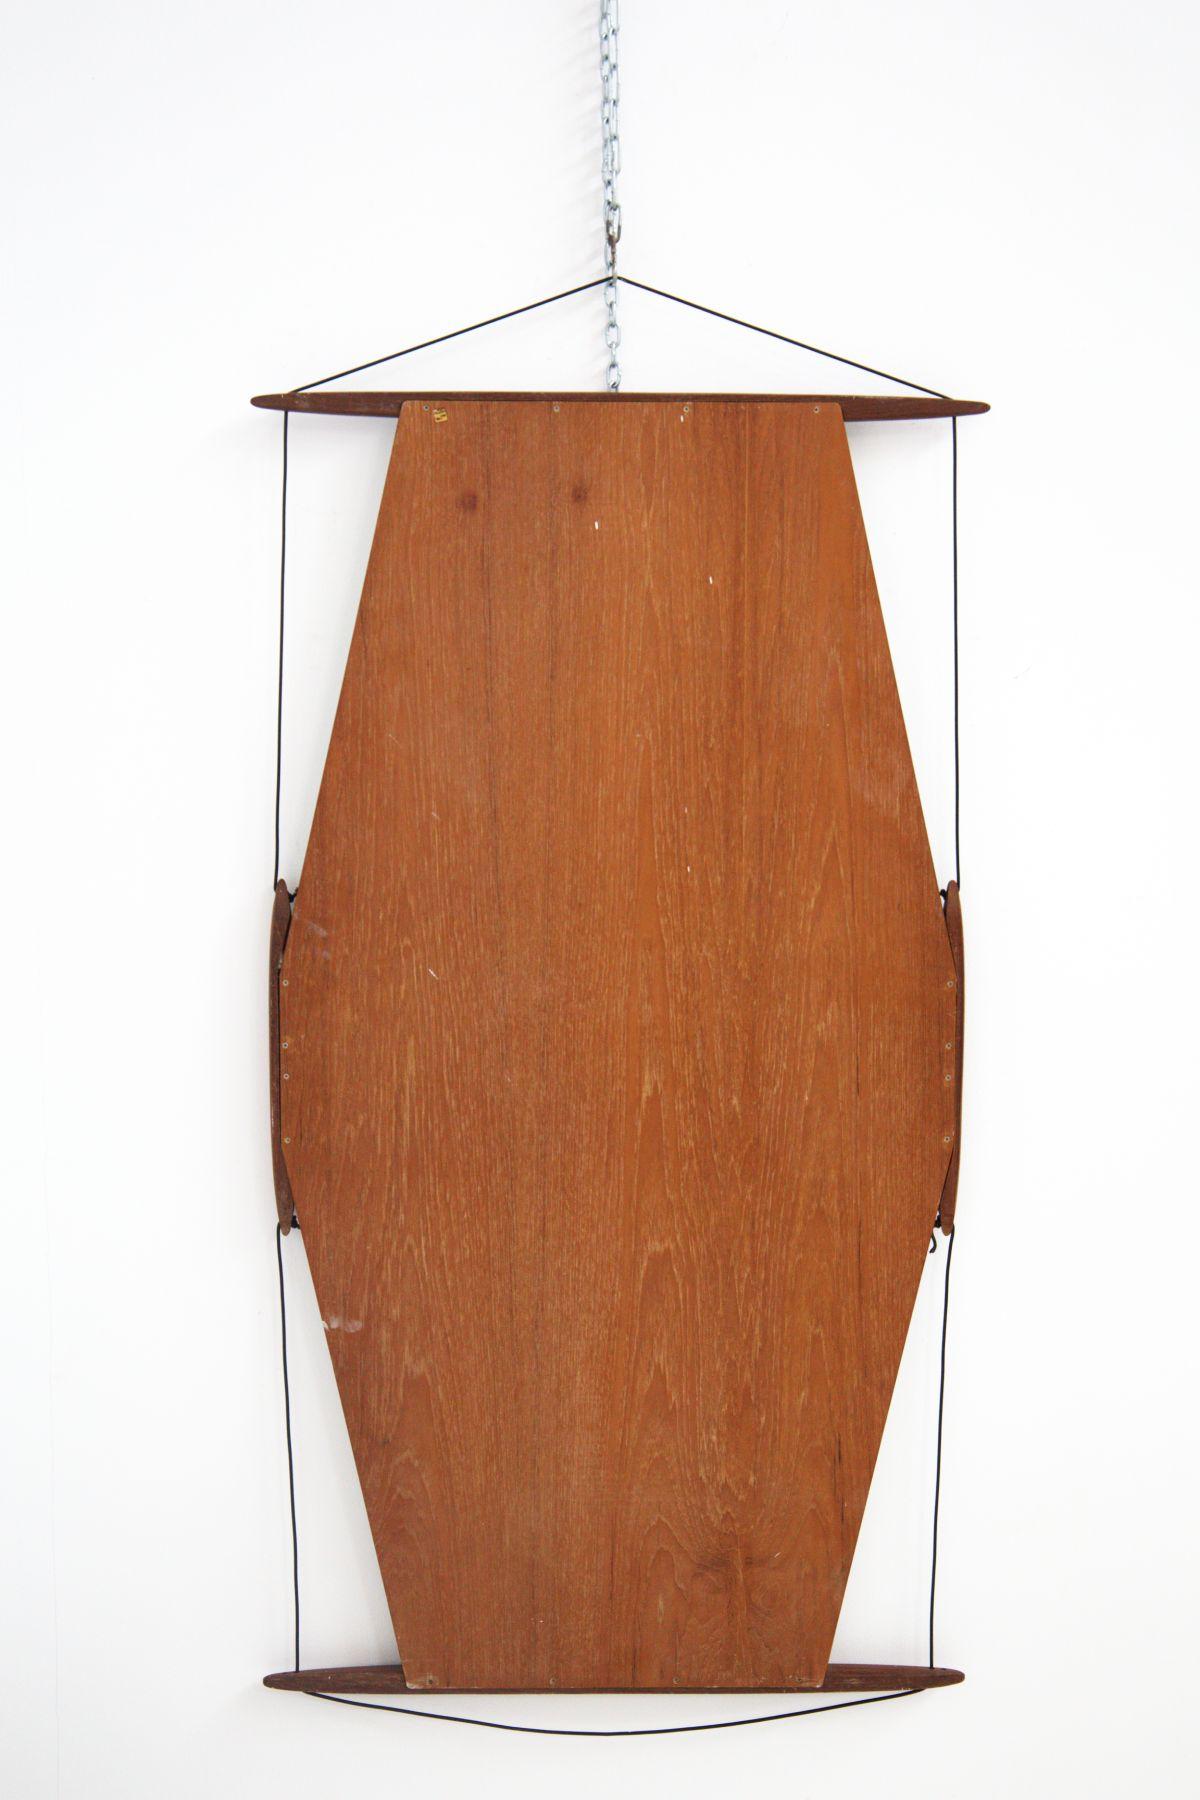 Ico Parisi Midcentury Wall Mirror in Wood 1